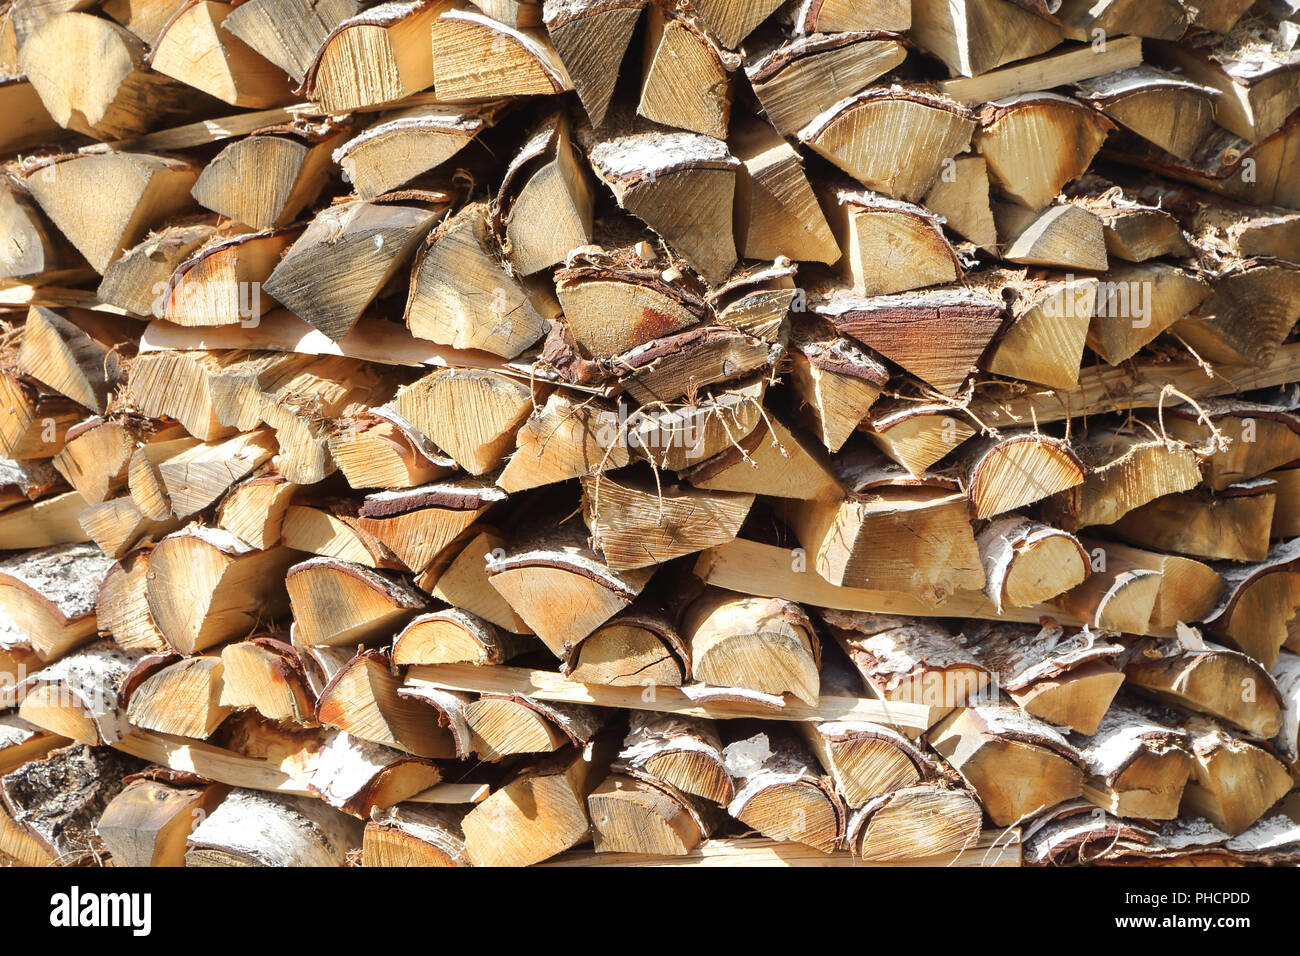 Full frame image of stacked fire wood. Stock Photo